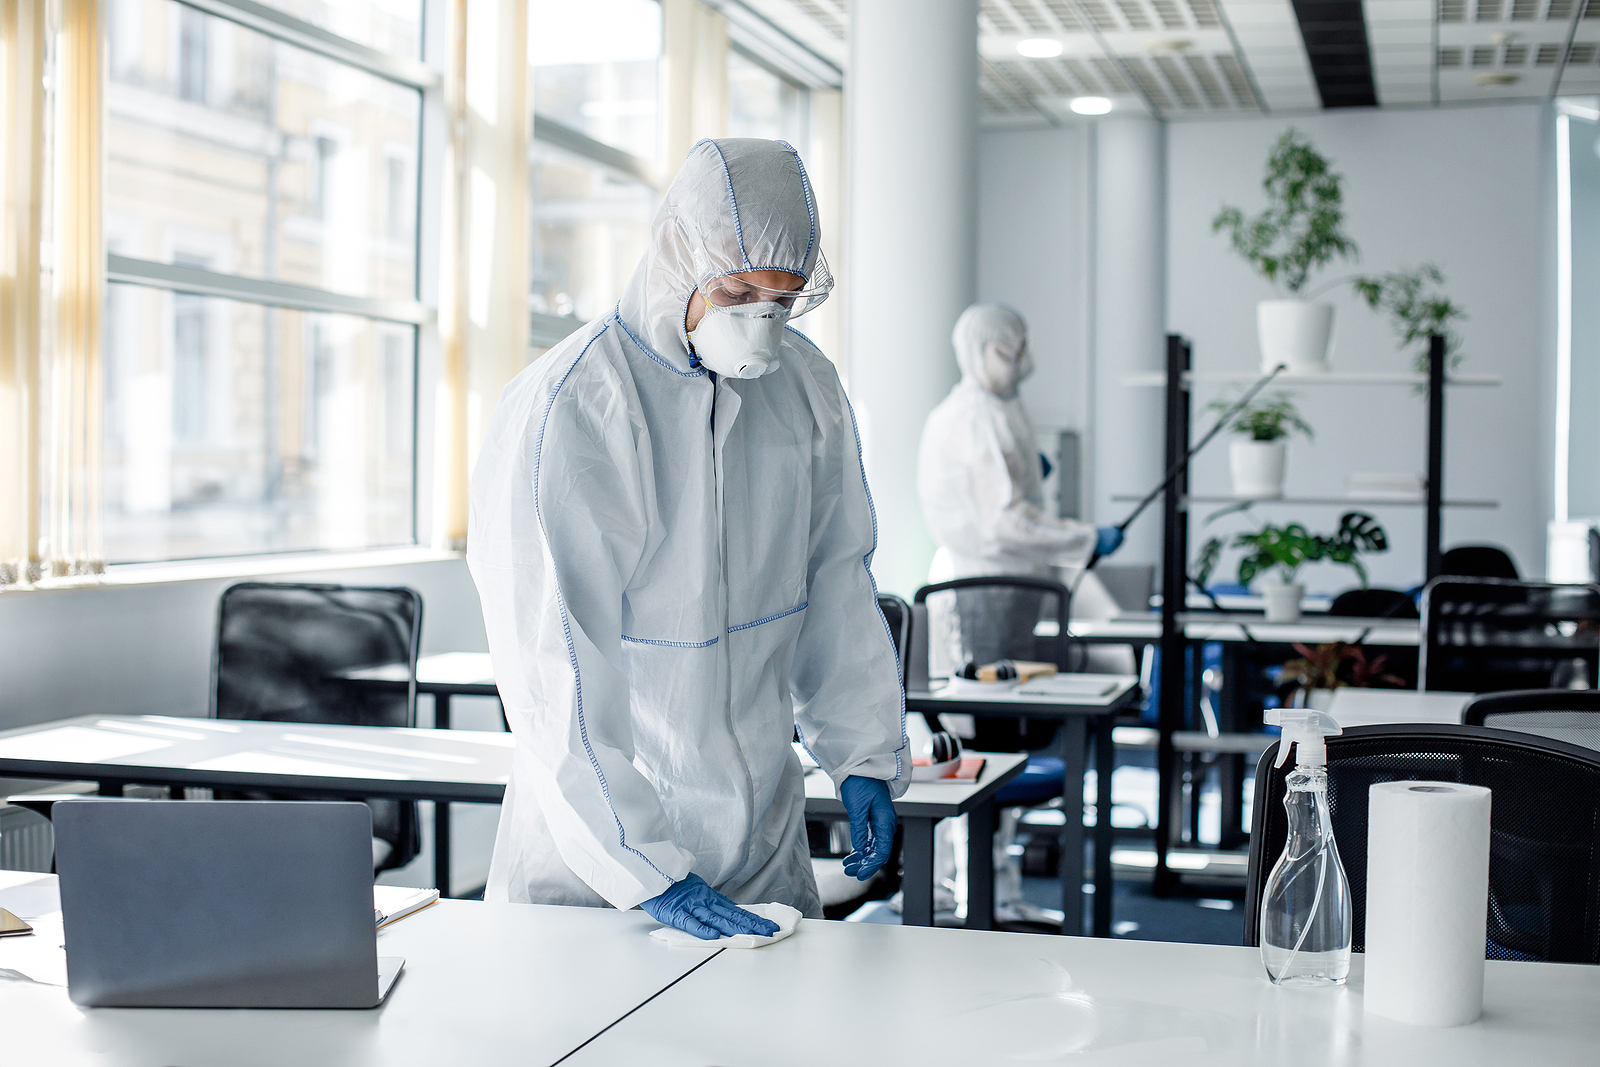 Major Reasons To Look For Commercial Cleaning Companies During The Pandemic